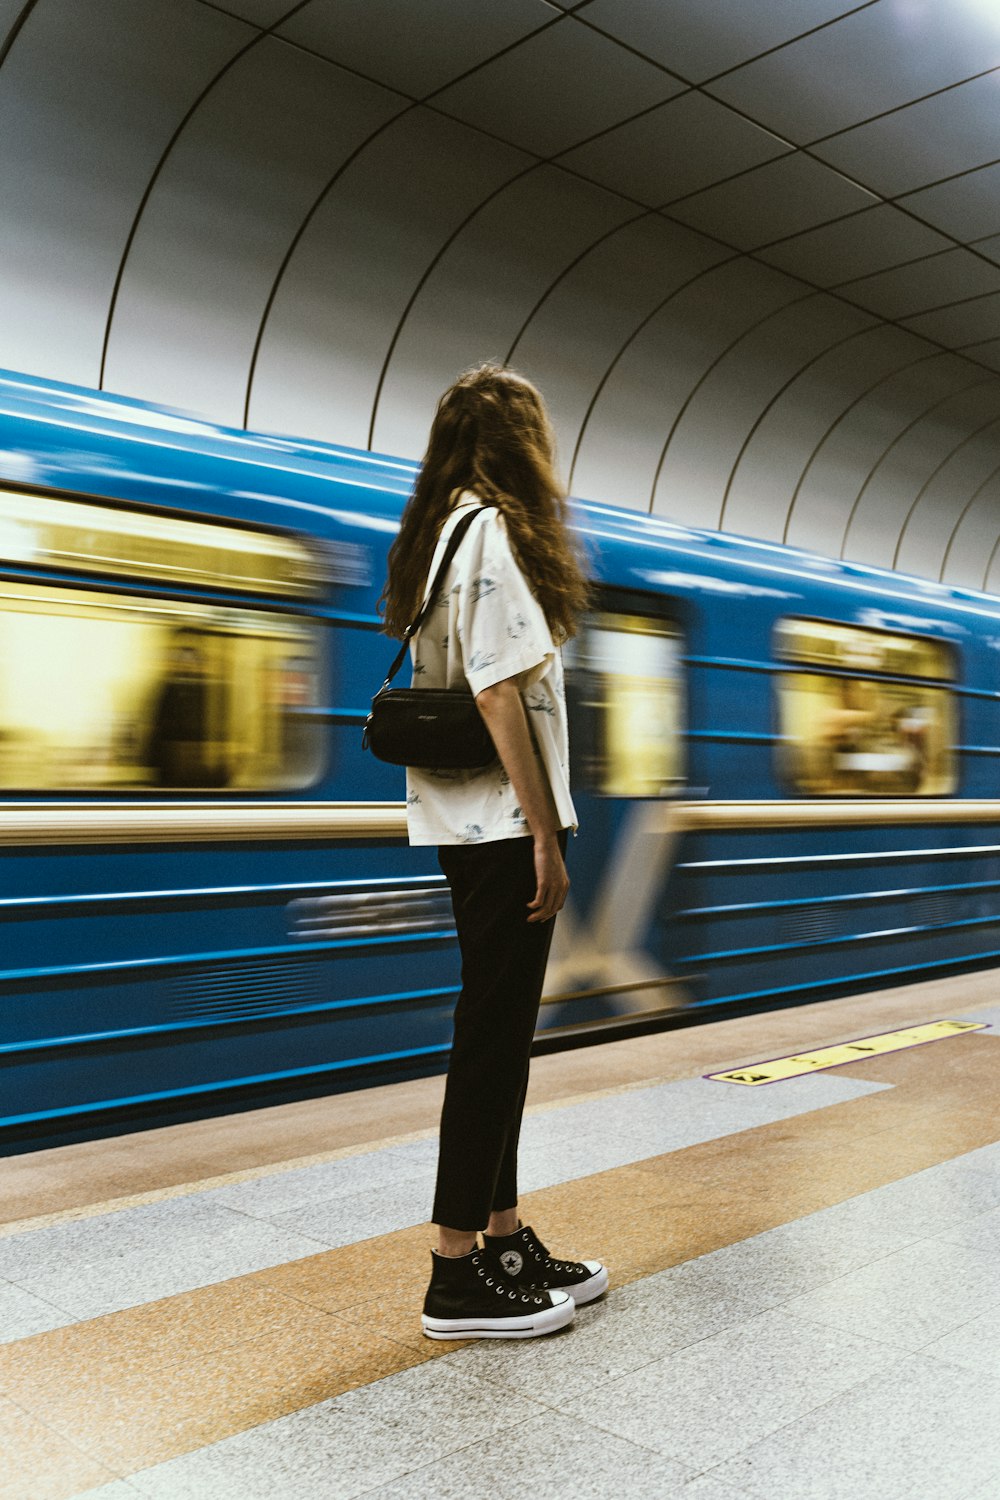 a woman standing on a platform waiting for a train